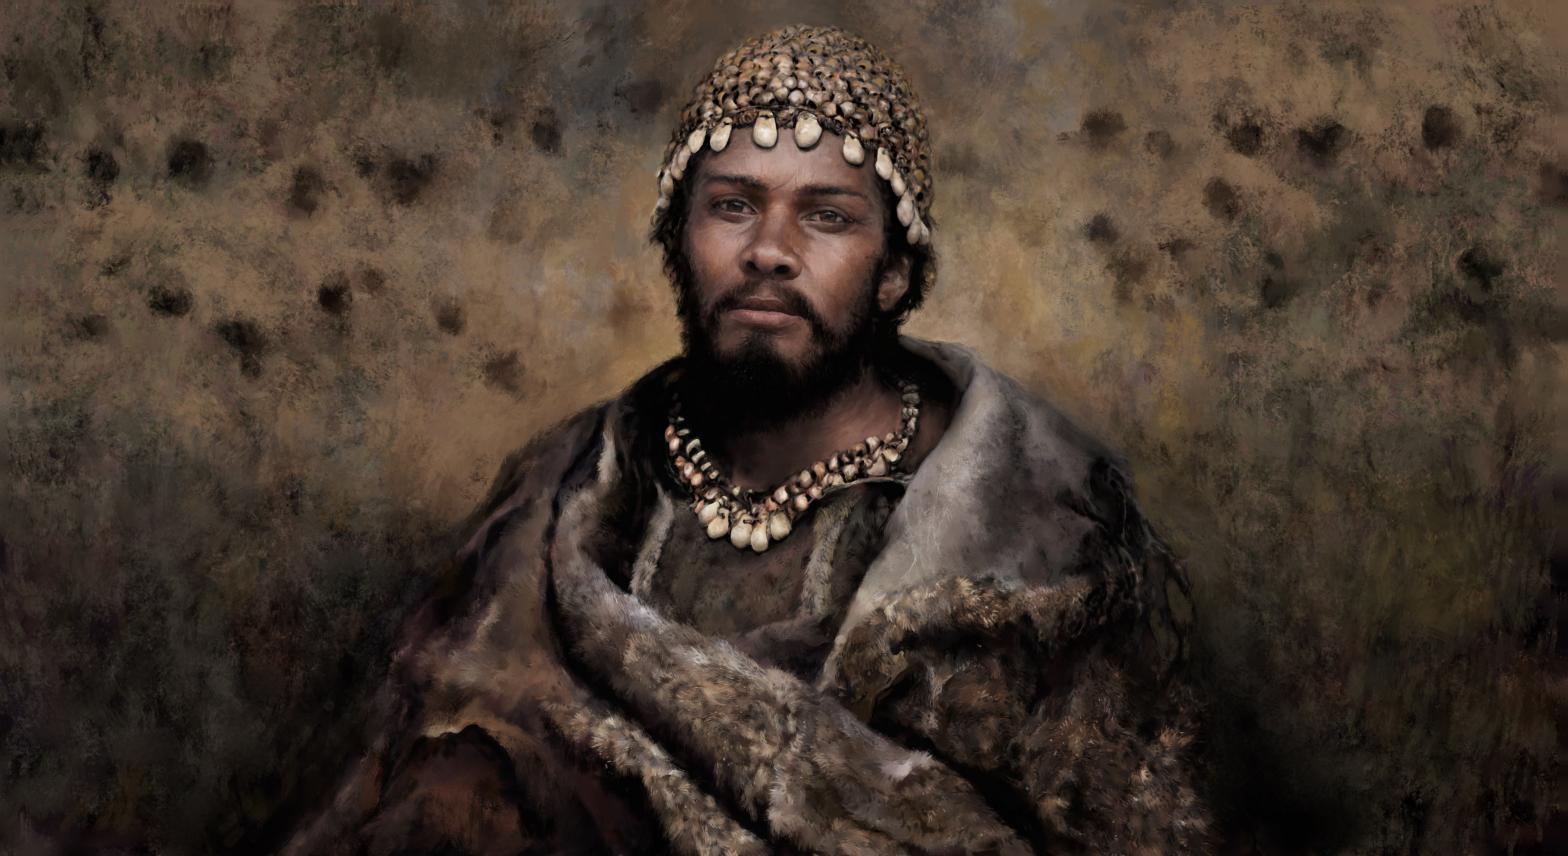 A reconstruction of a Gravettian hunter-gatherer, based on archaeological findings at the Arene Candide site in Italy. (Illustration: Tom Bjoerklund)